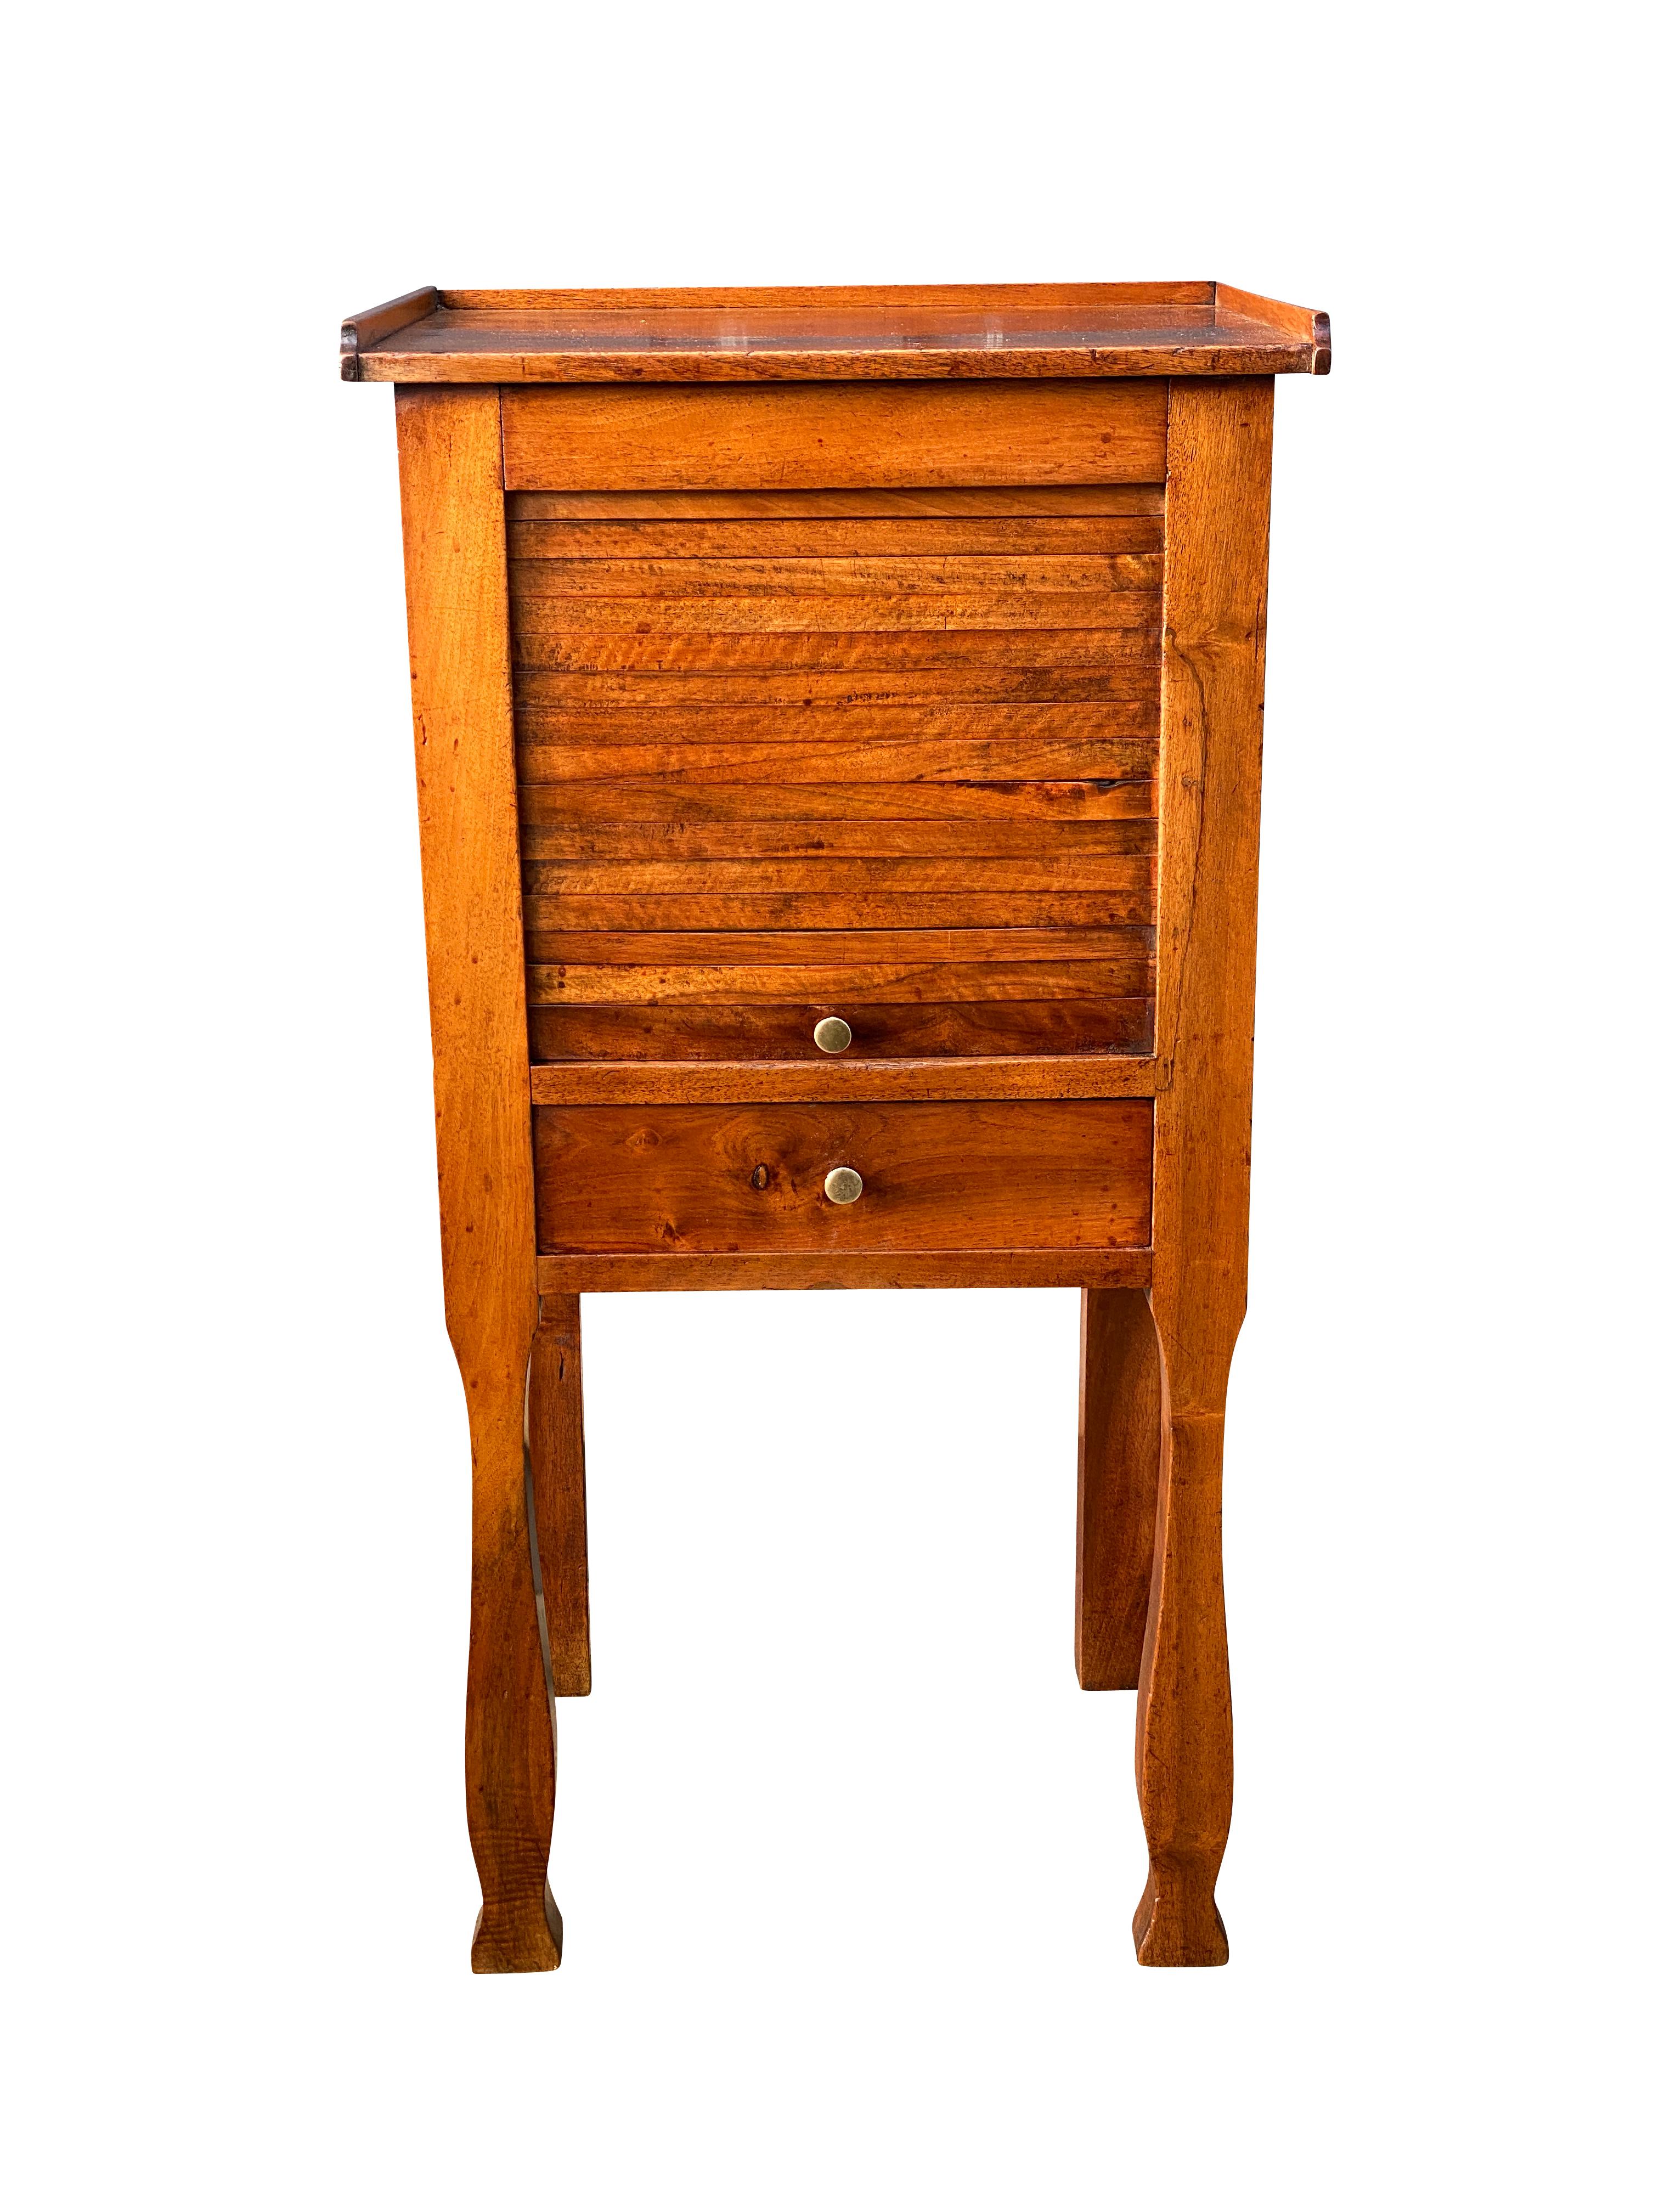 With rectangular three quarter gallery top over a tambour door and a drawer raised on shaped straight legs.